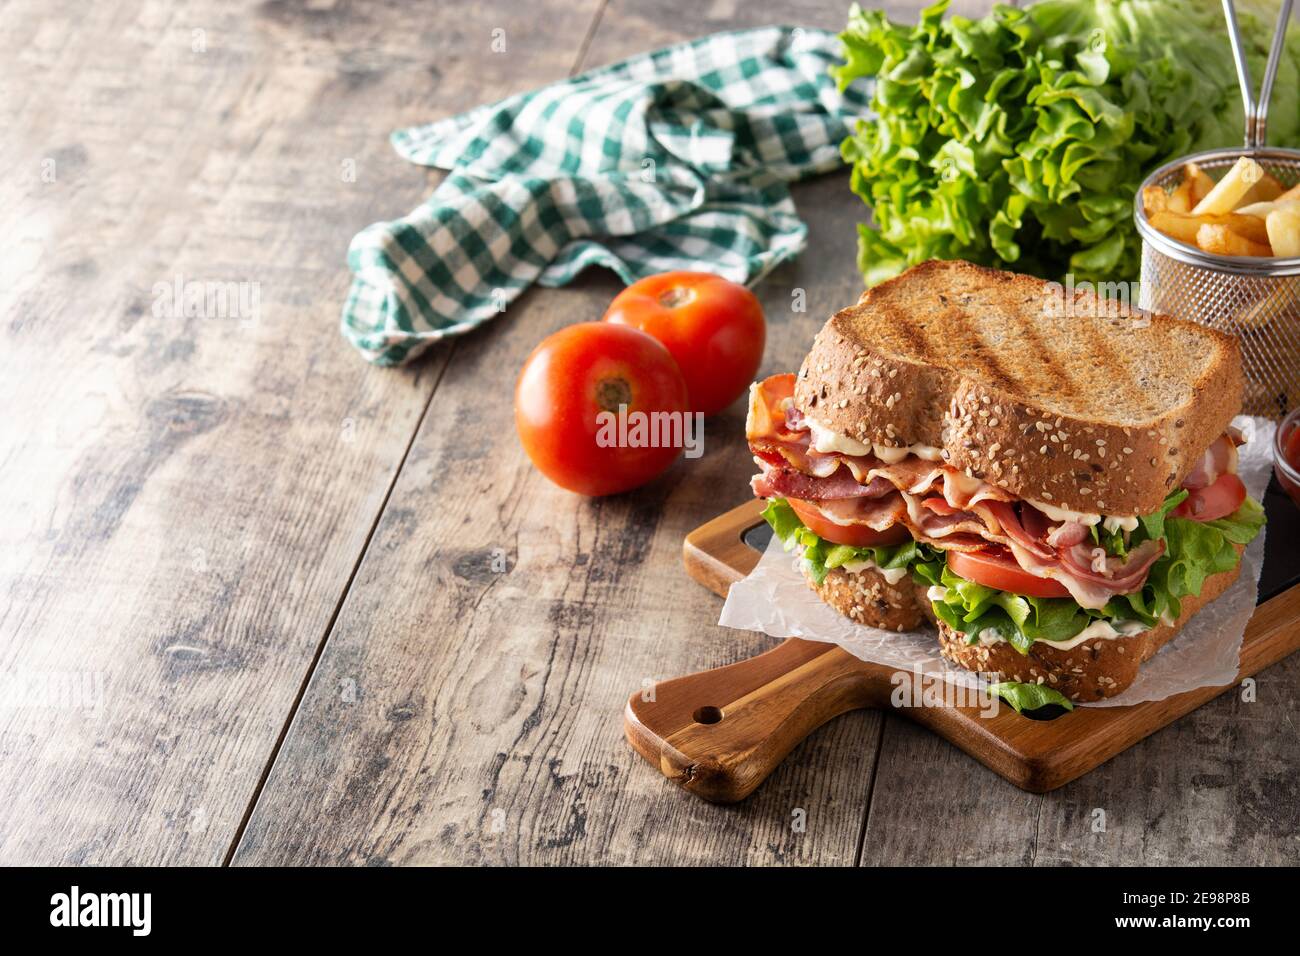 BLT sandwich and fries on wooden table Stock Photo